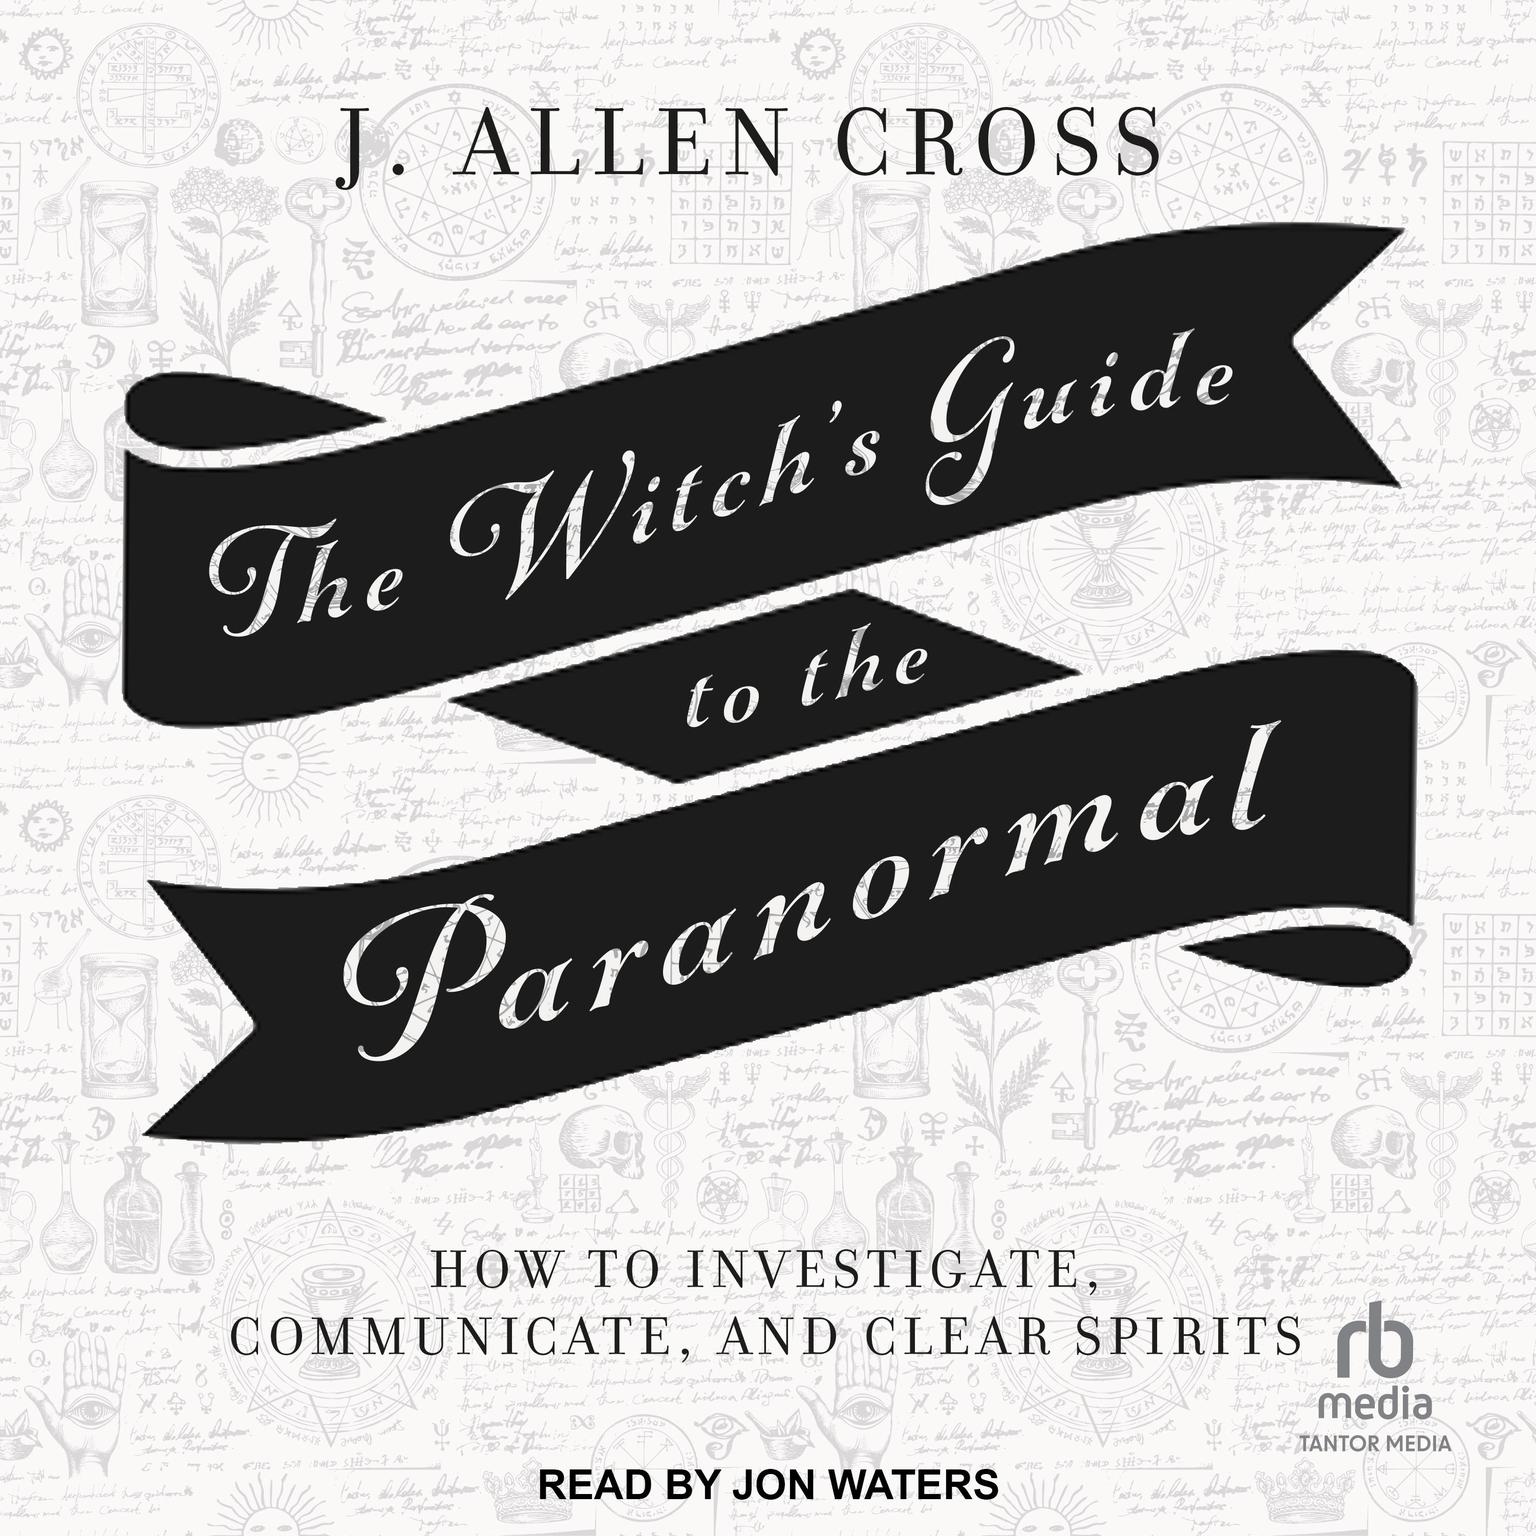 The Witchs Guide to the Paranormal: How to Investigate, Communicate, and Clear Spirits Audiobook, by J. Allen Cross